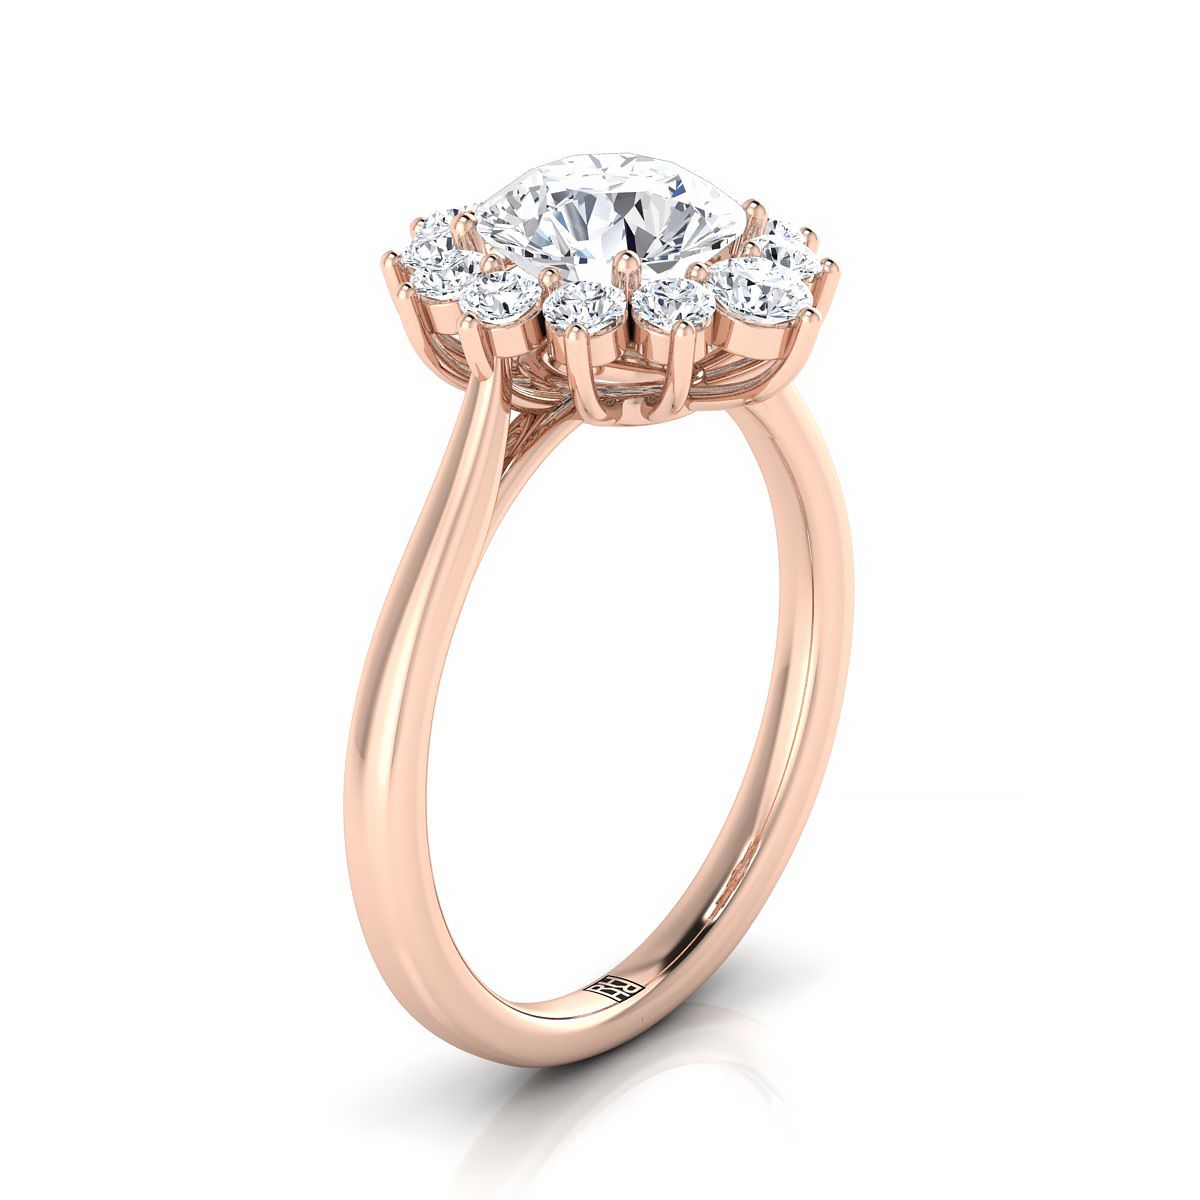 14K Rose Gold Round Brilliant Ruby Floral Diamond Halo Engagement Ring -1/2ctw